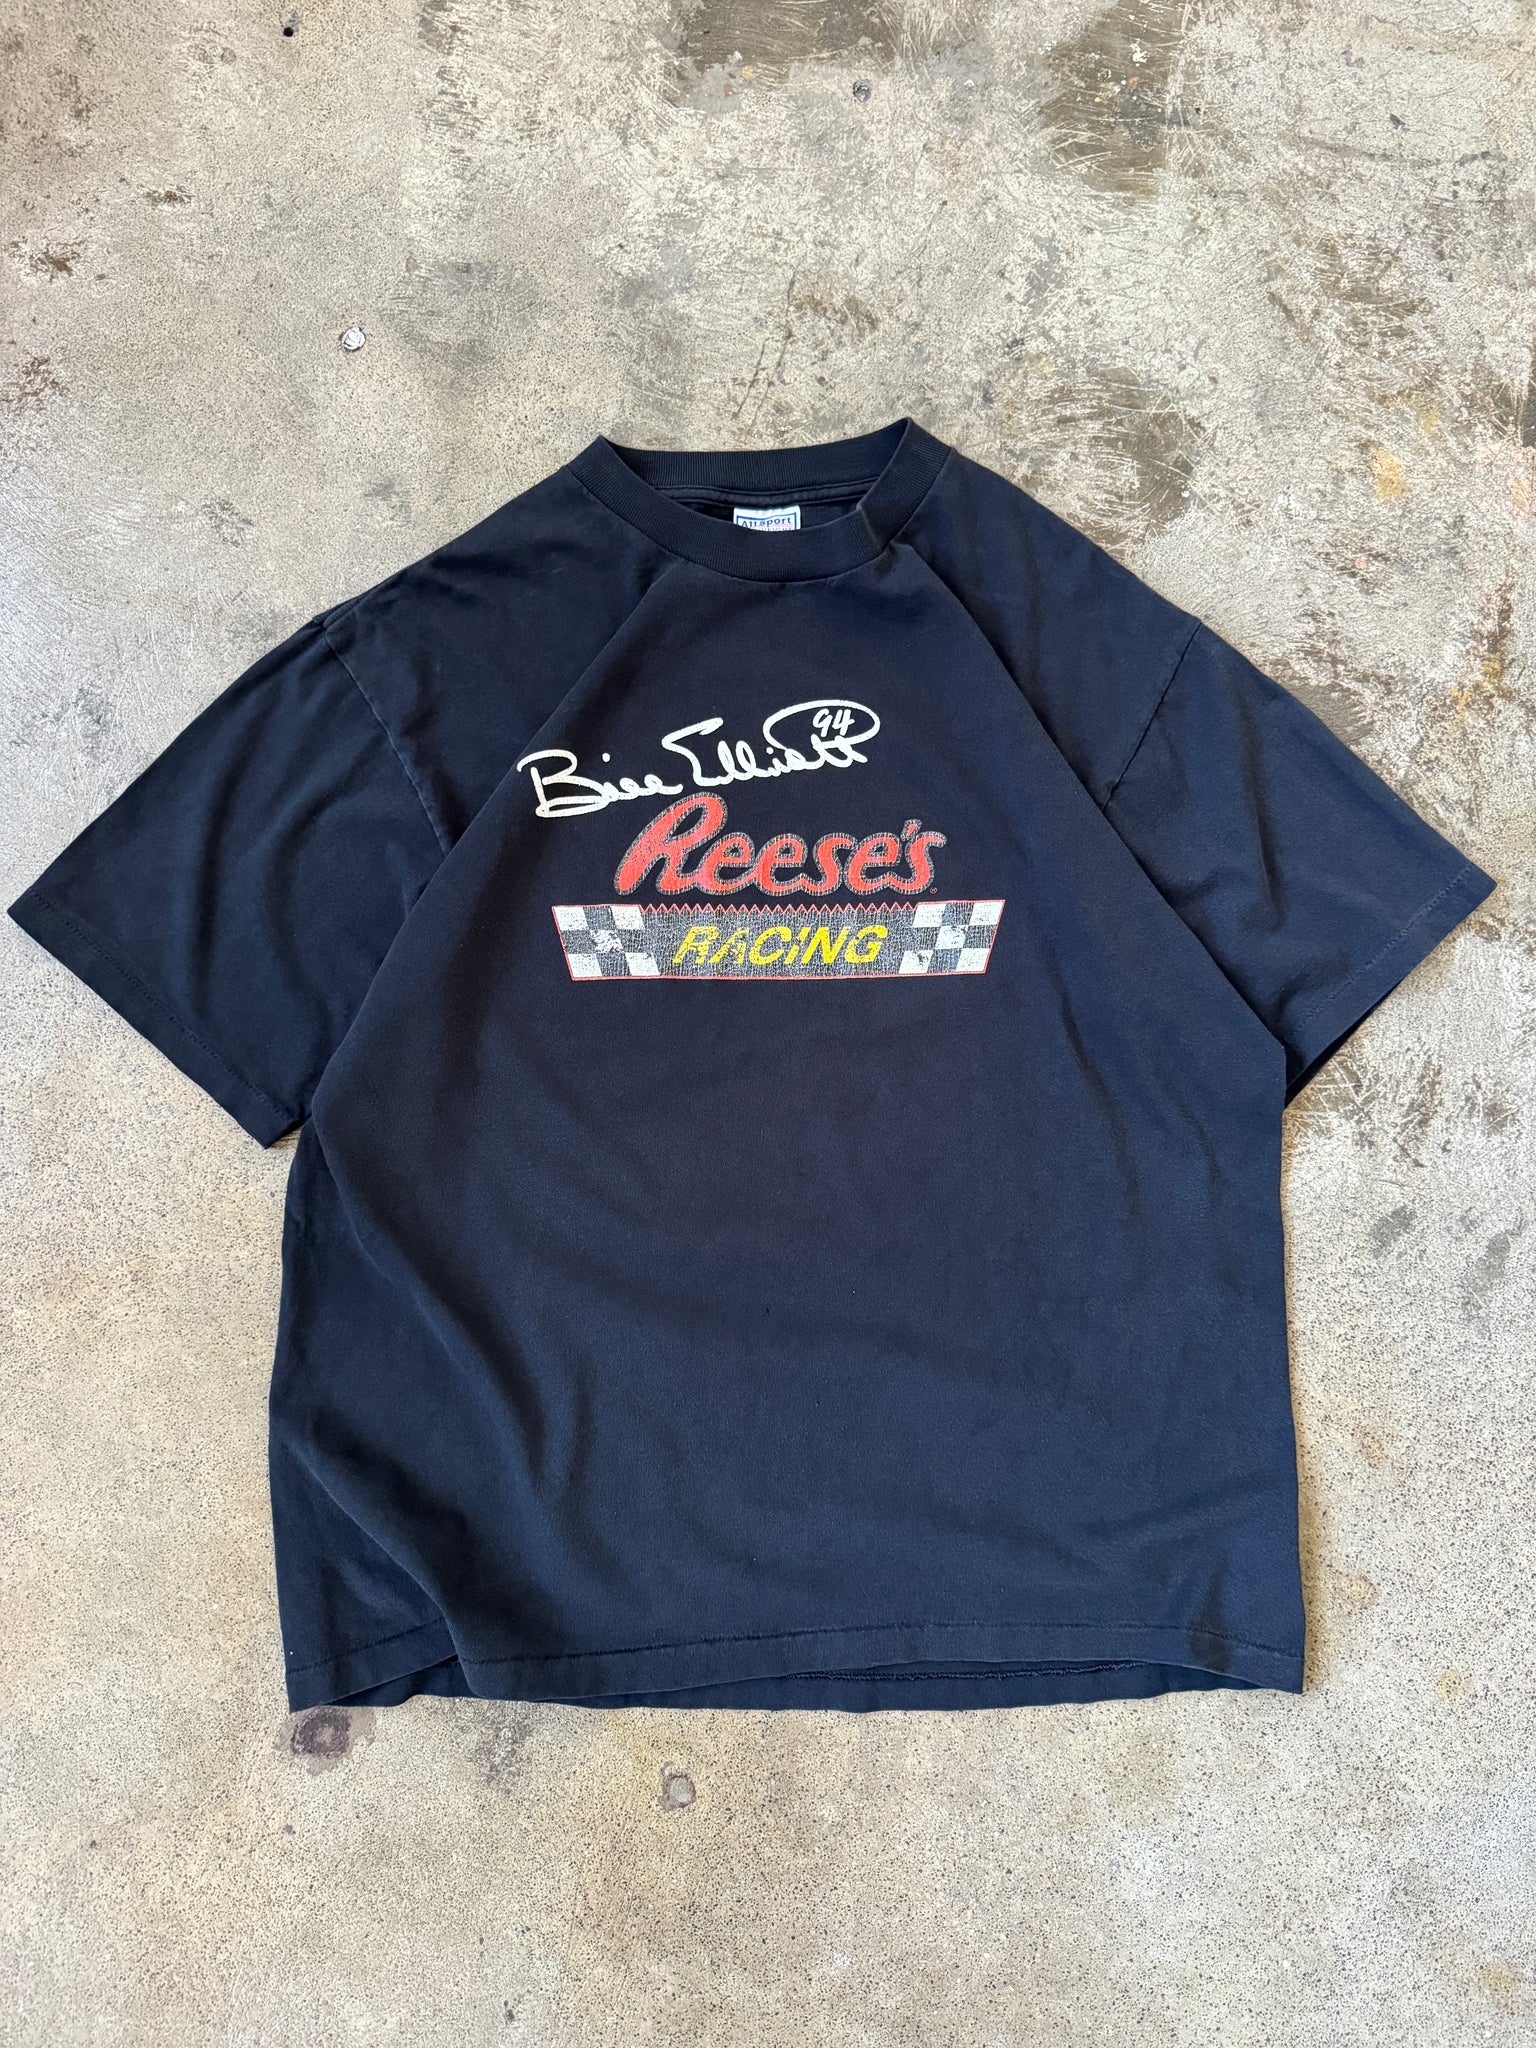 Vintage 1995 Reese's Racing T'Shirt (L)